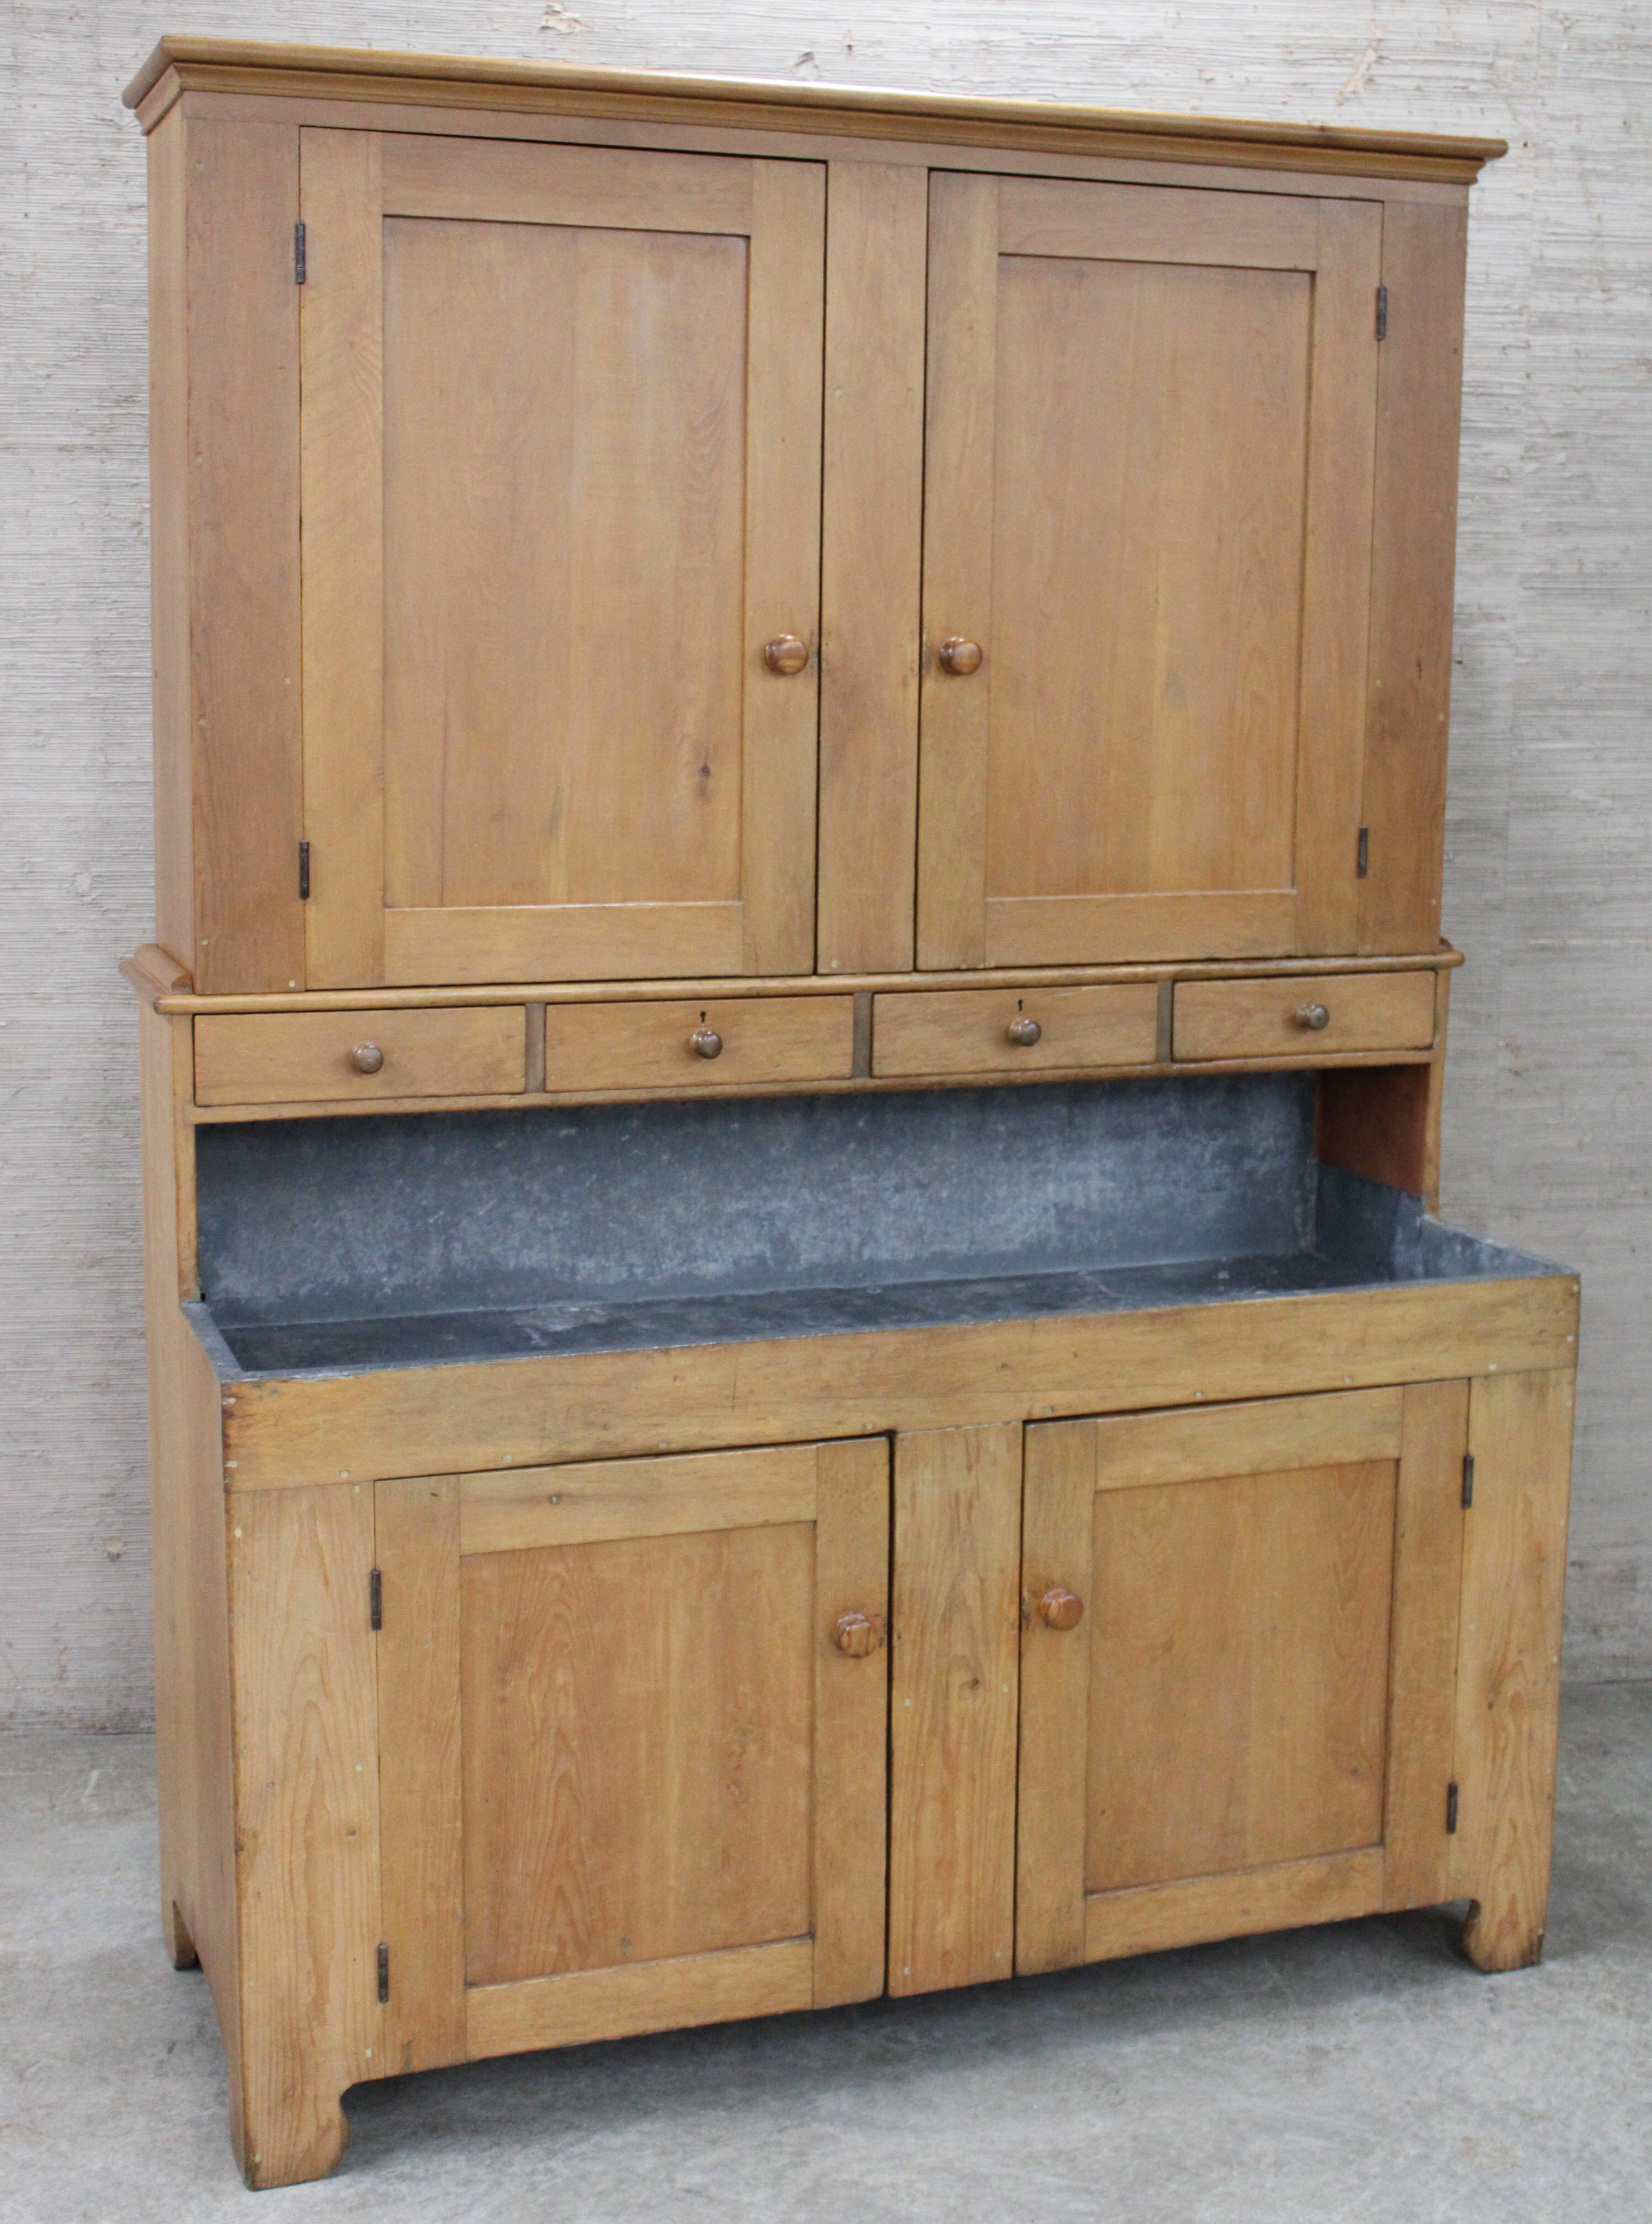 EARLY AMERICAN HEART PINE KITCHEN